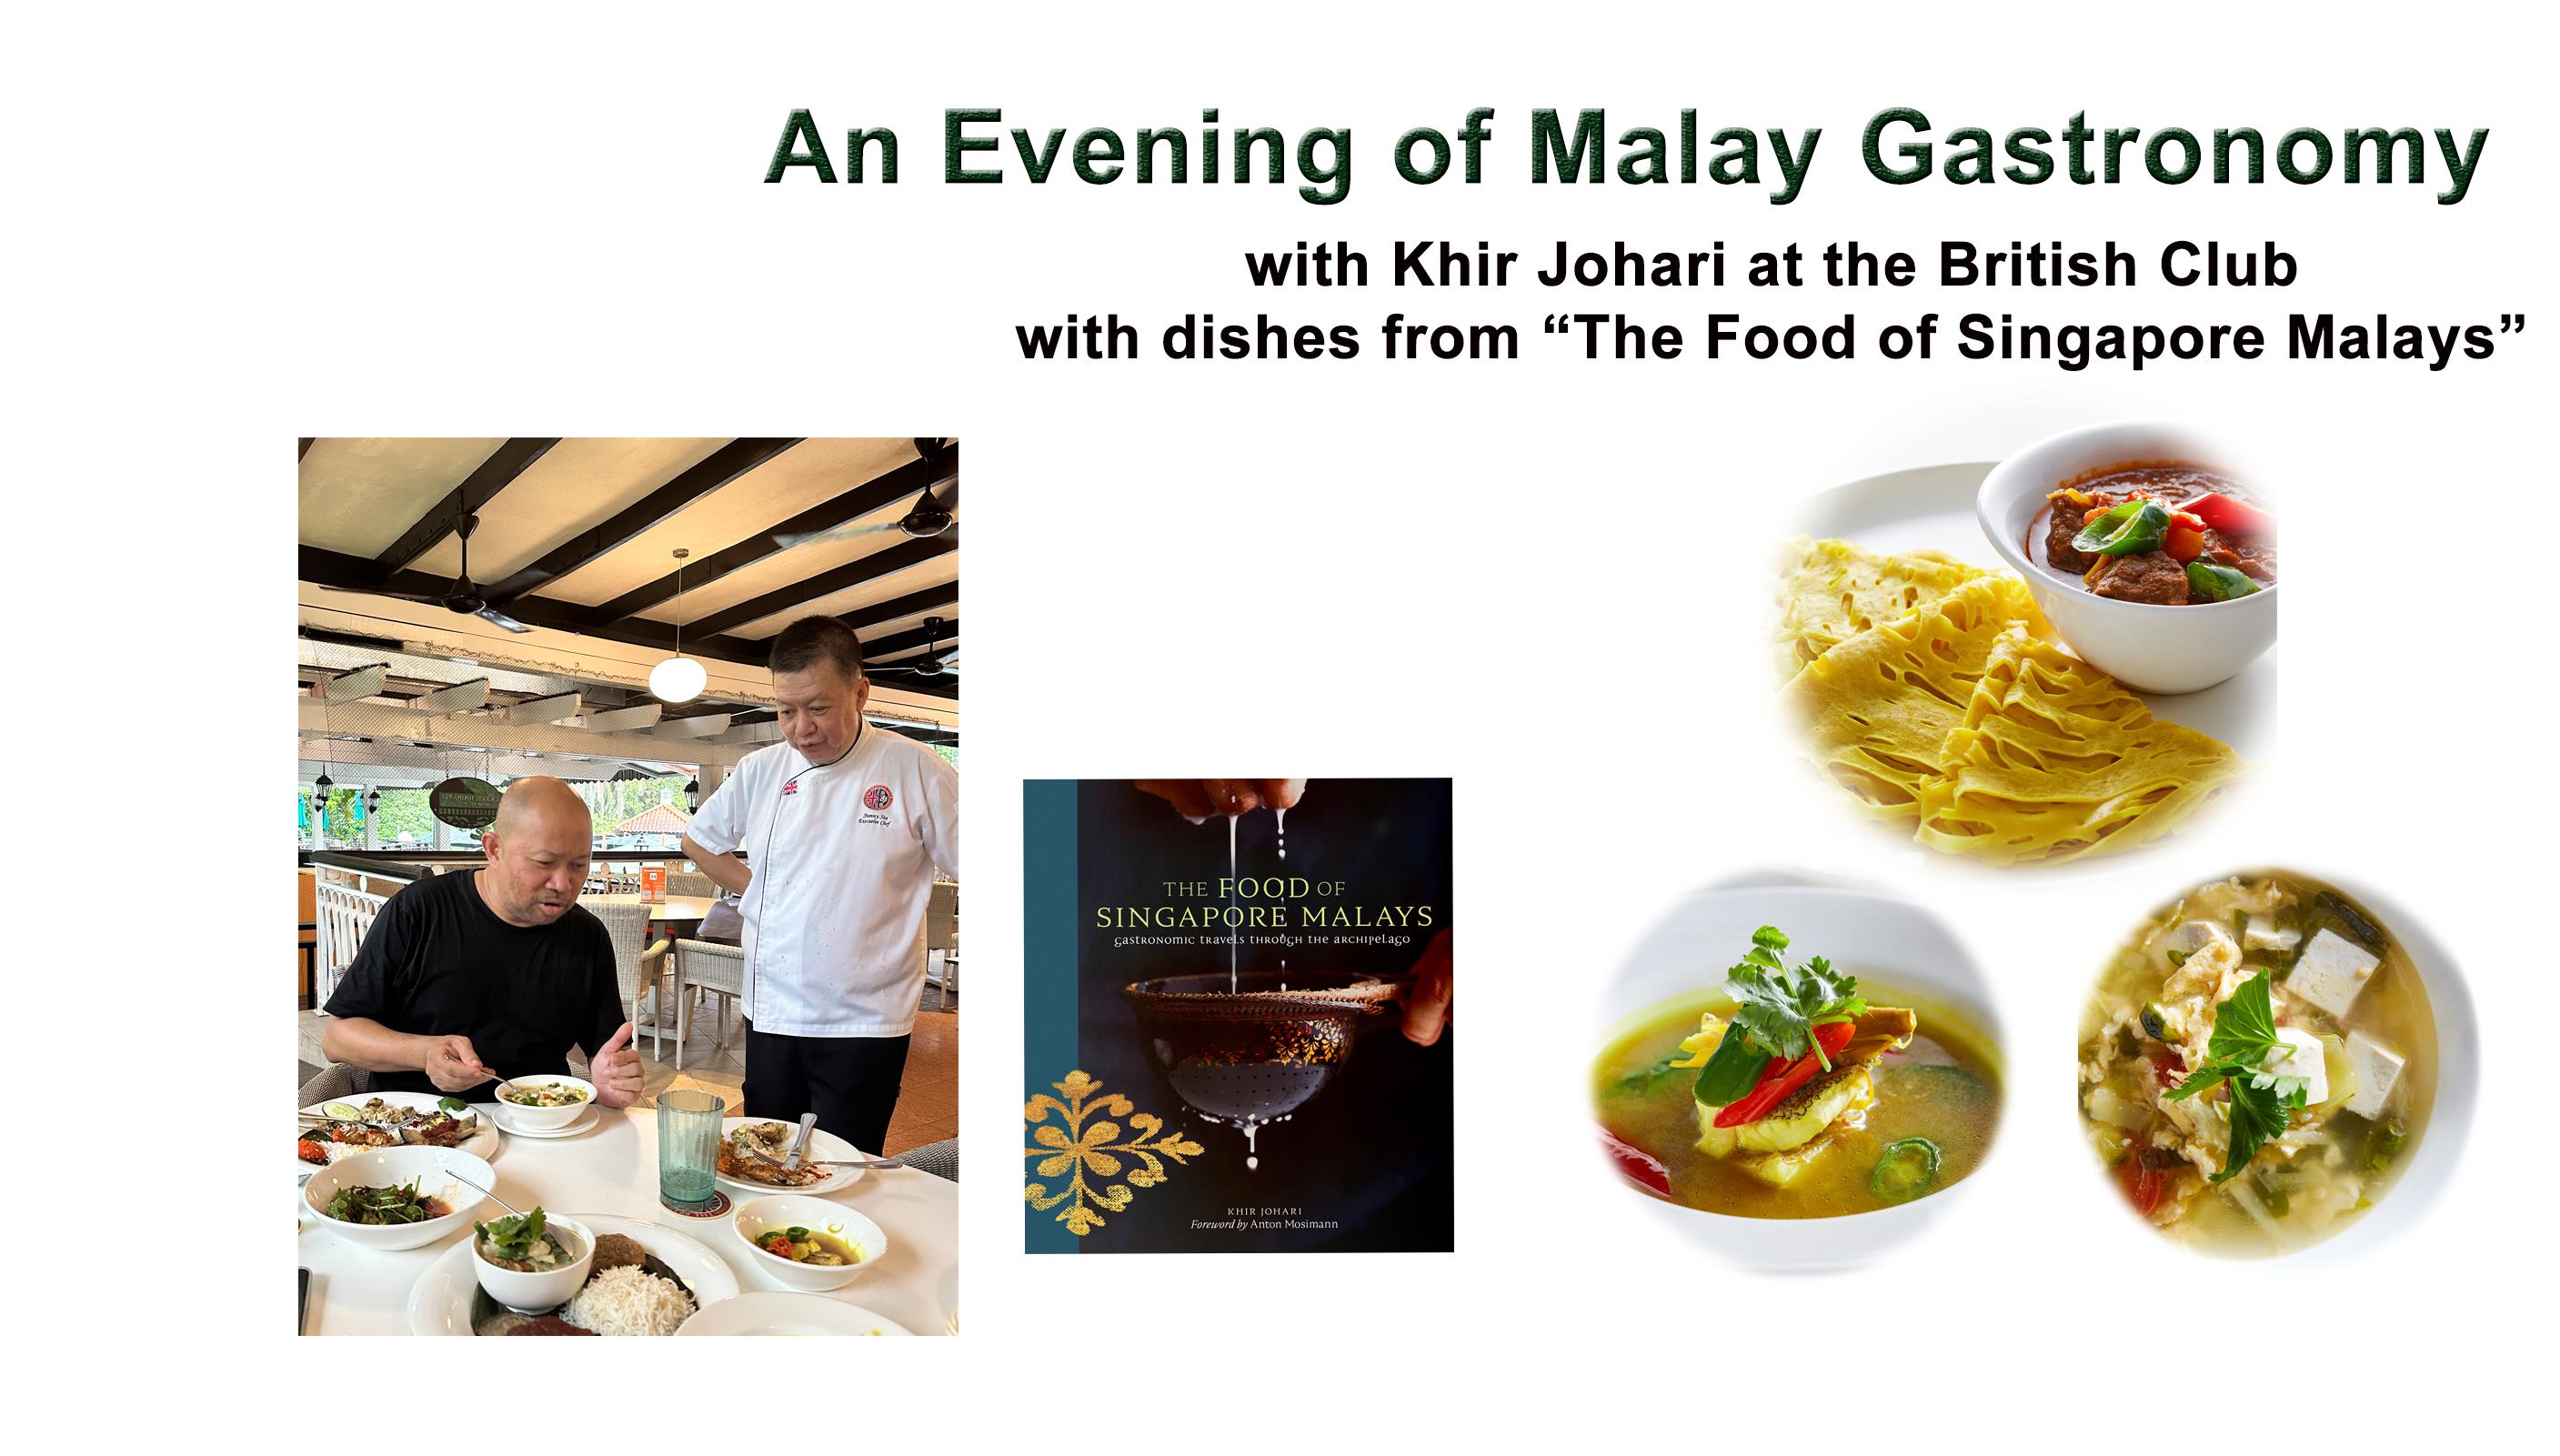 Join us for this unique event at the BC with Khir Johari